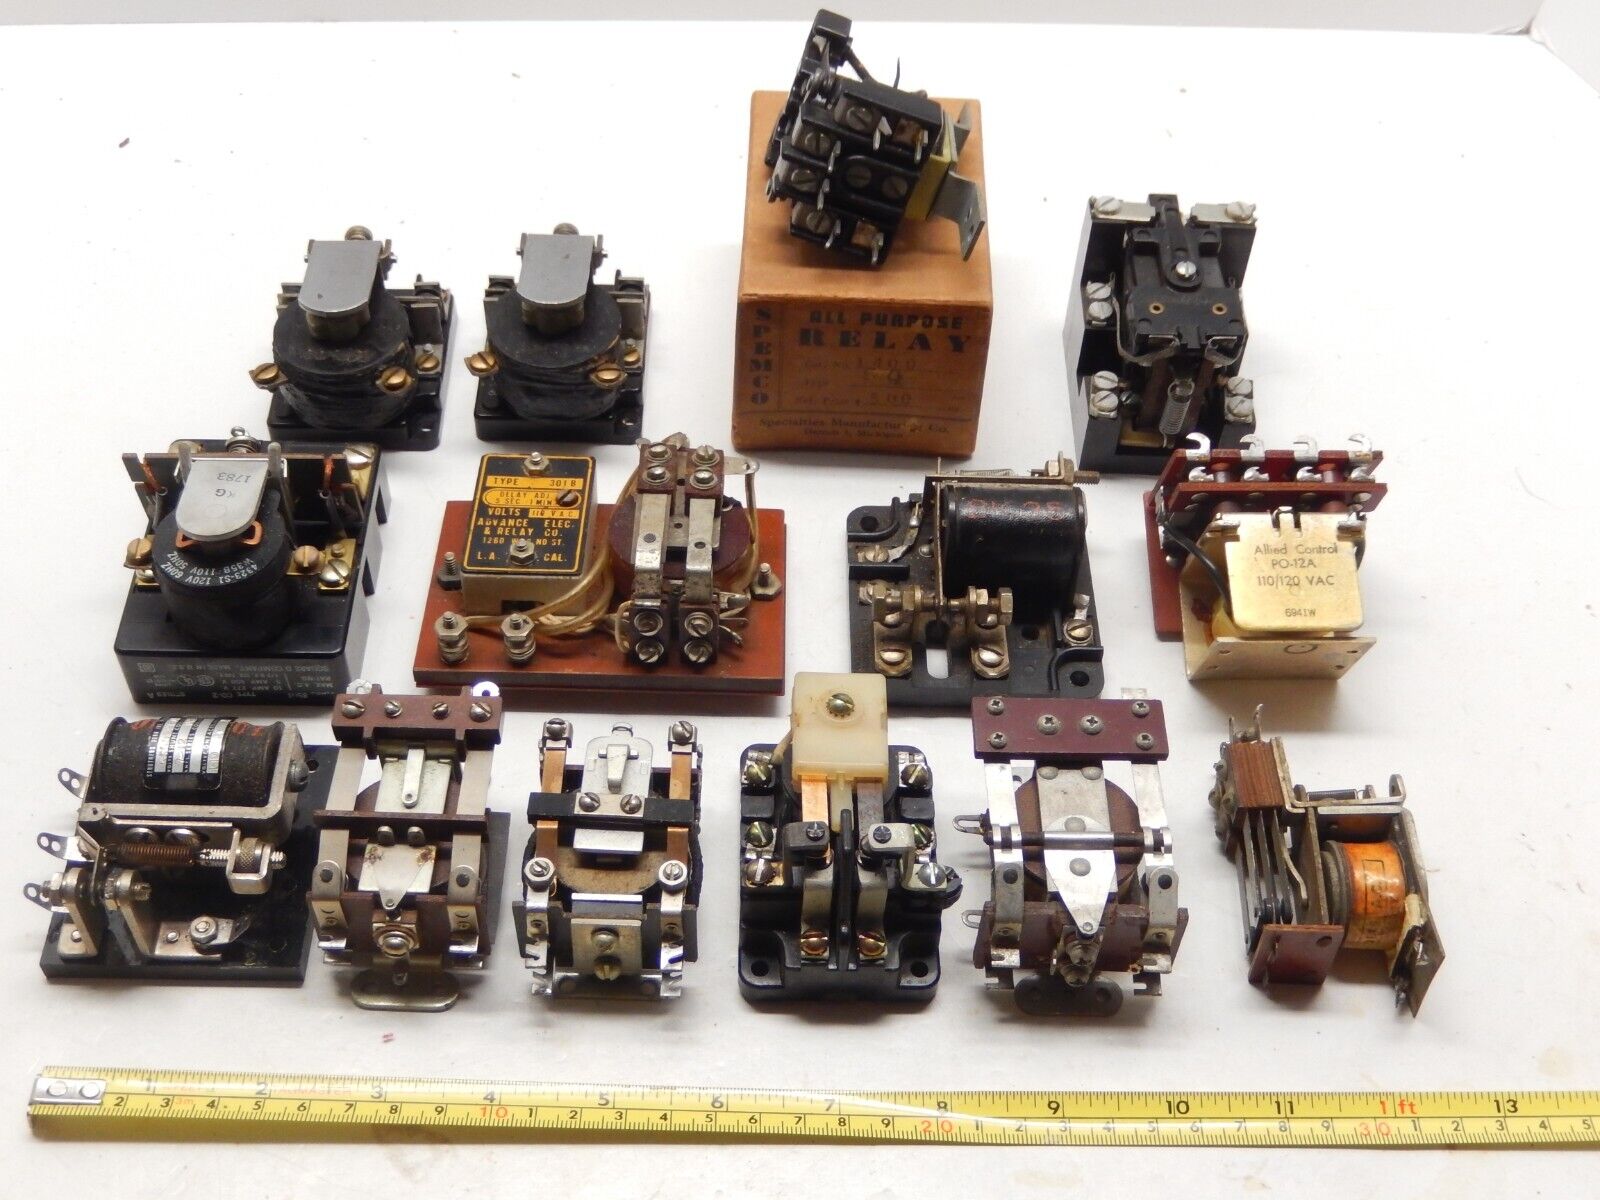 LOT OF 14 RARE COLLECTIBLE VINTAGE ASSORTED RELAYS Без бренда